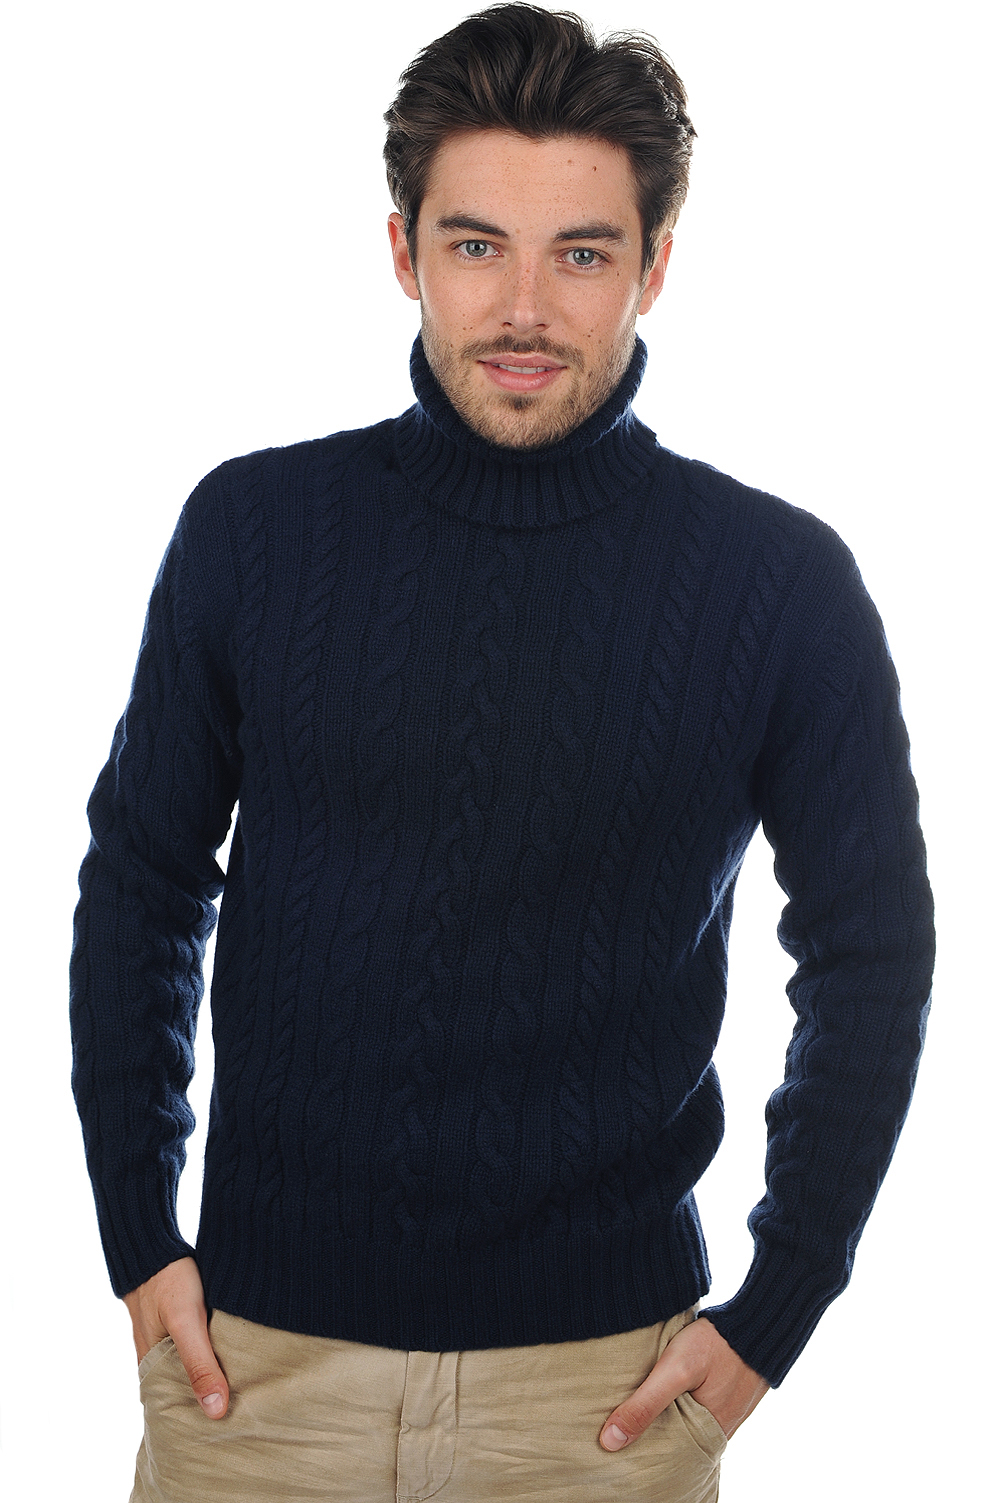 Cachemire pull homme lucas marine fonce xs